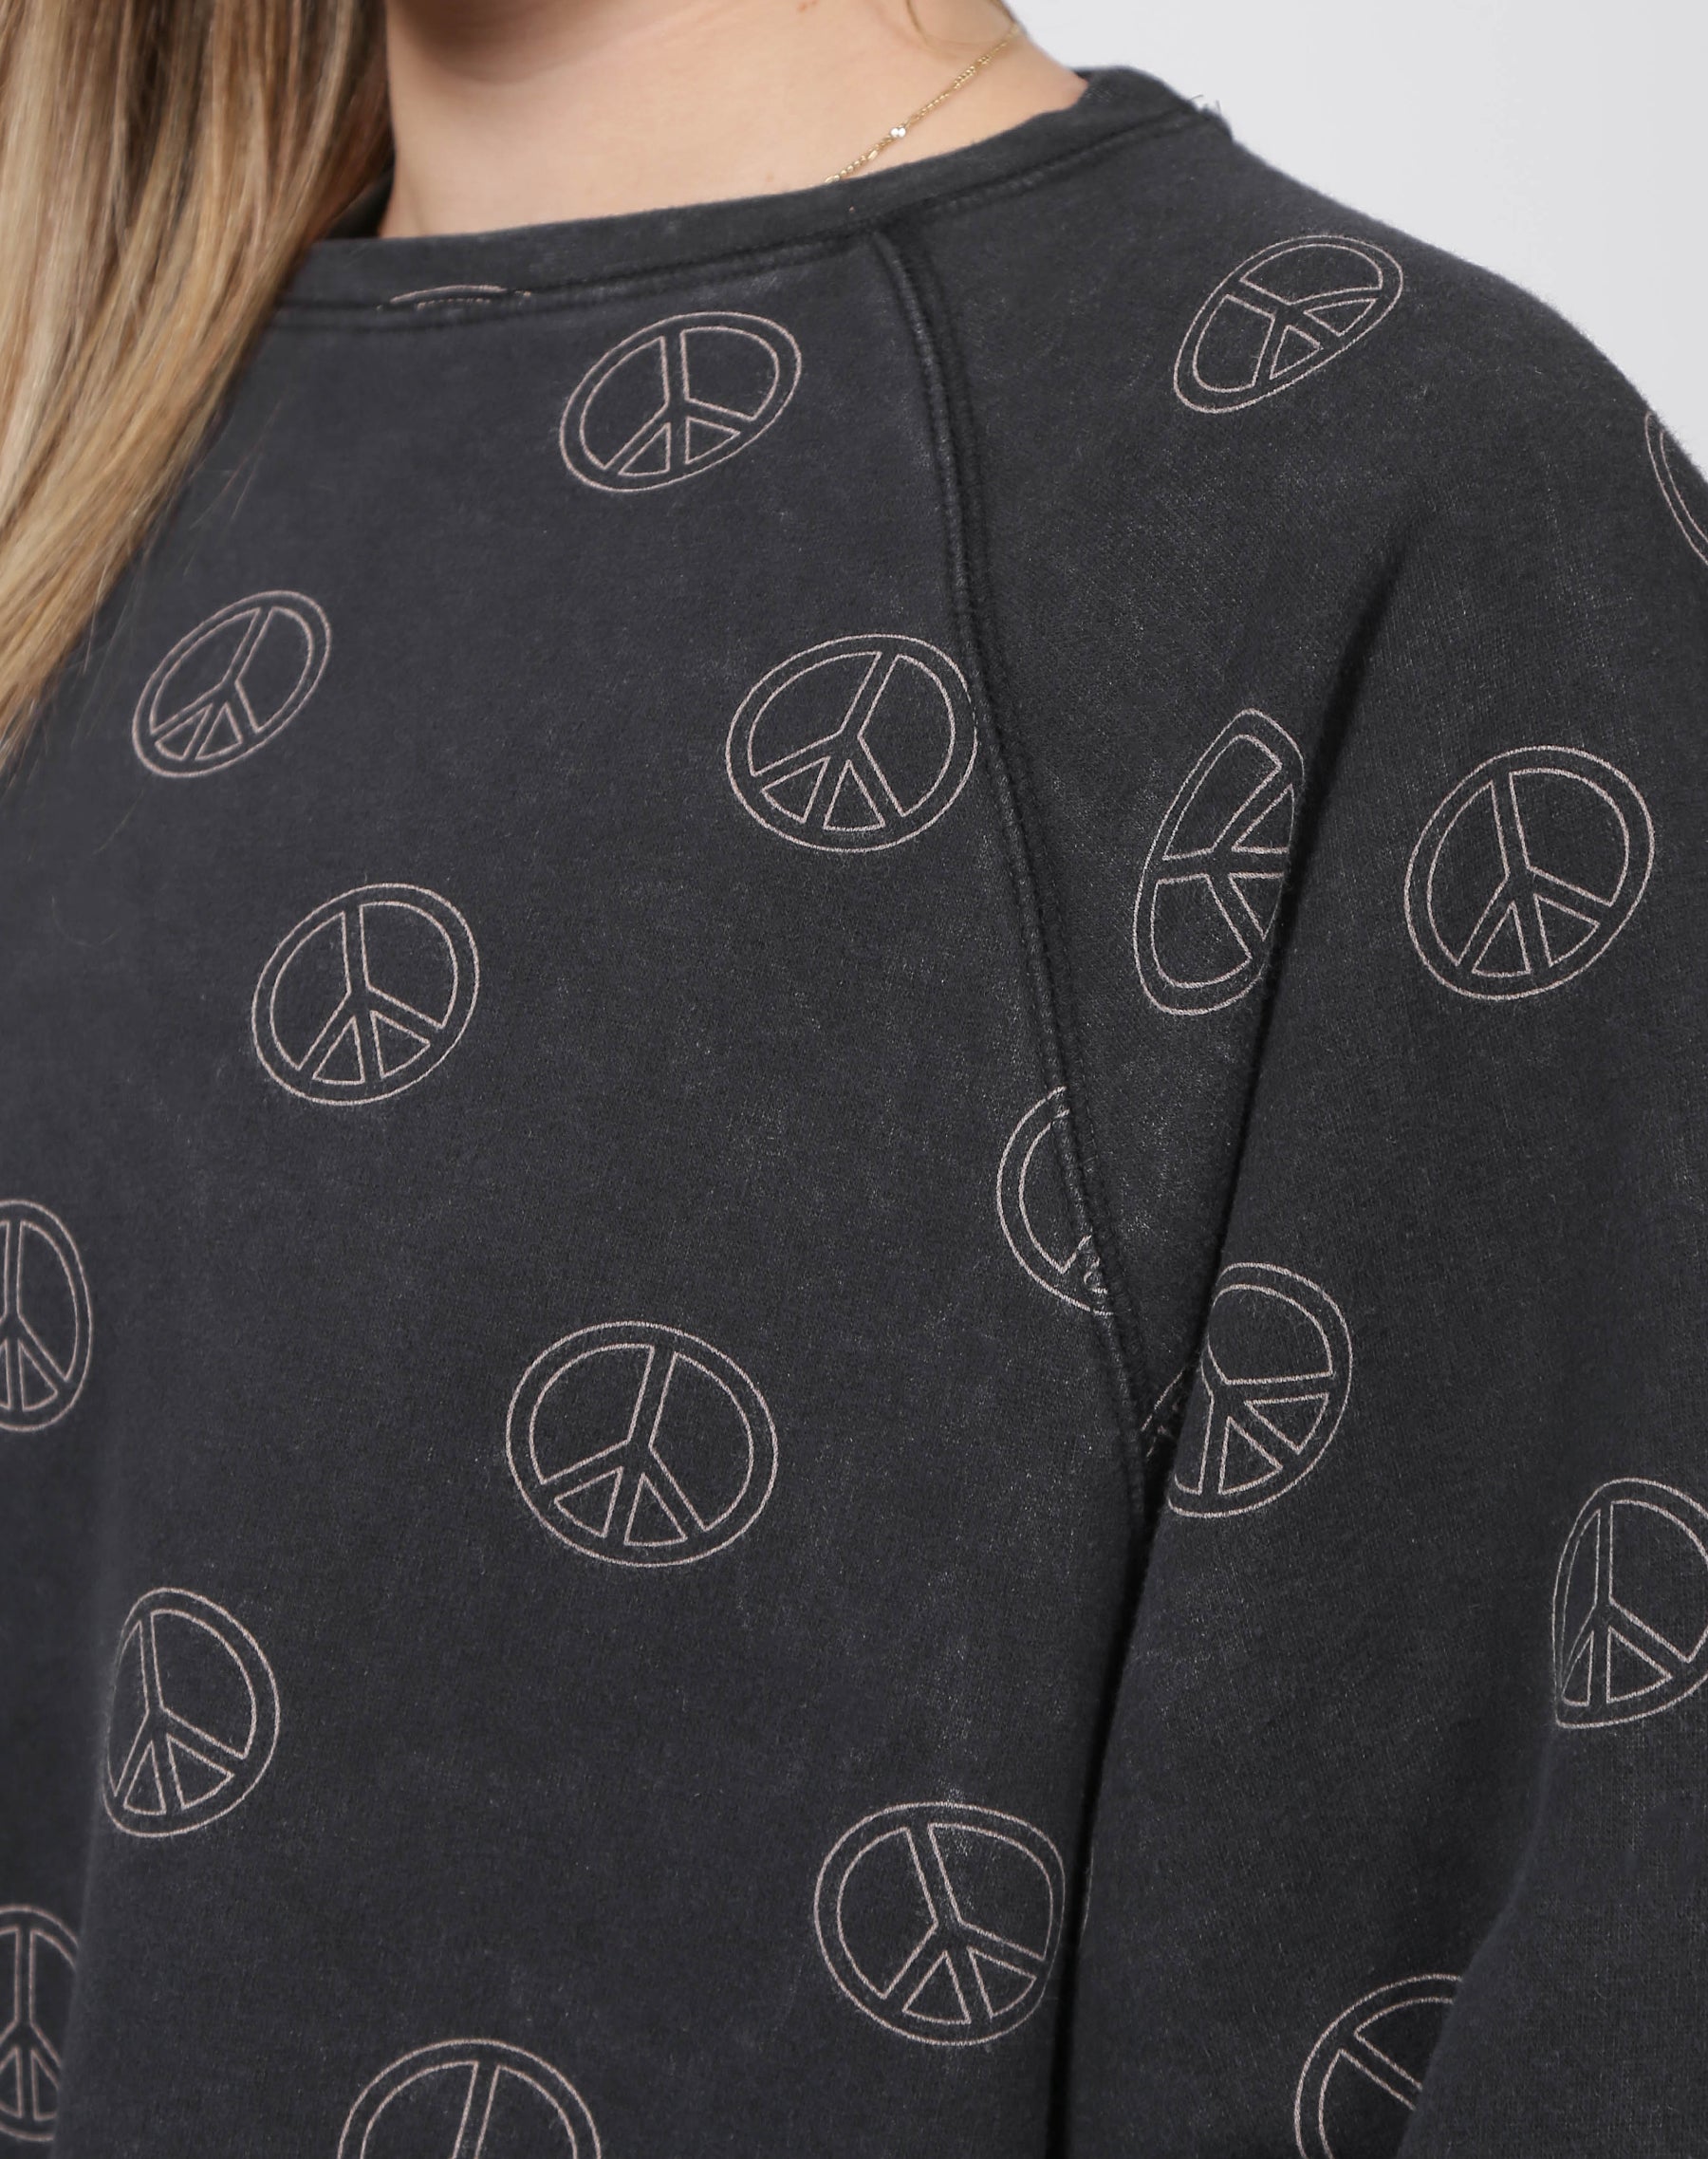 The "PEACE SIGN" Not Your Boyfriend's Crew Neck Sweatshirt | Washed Black